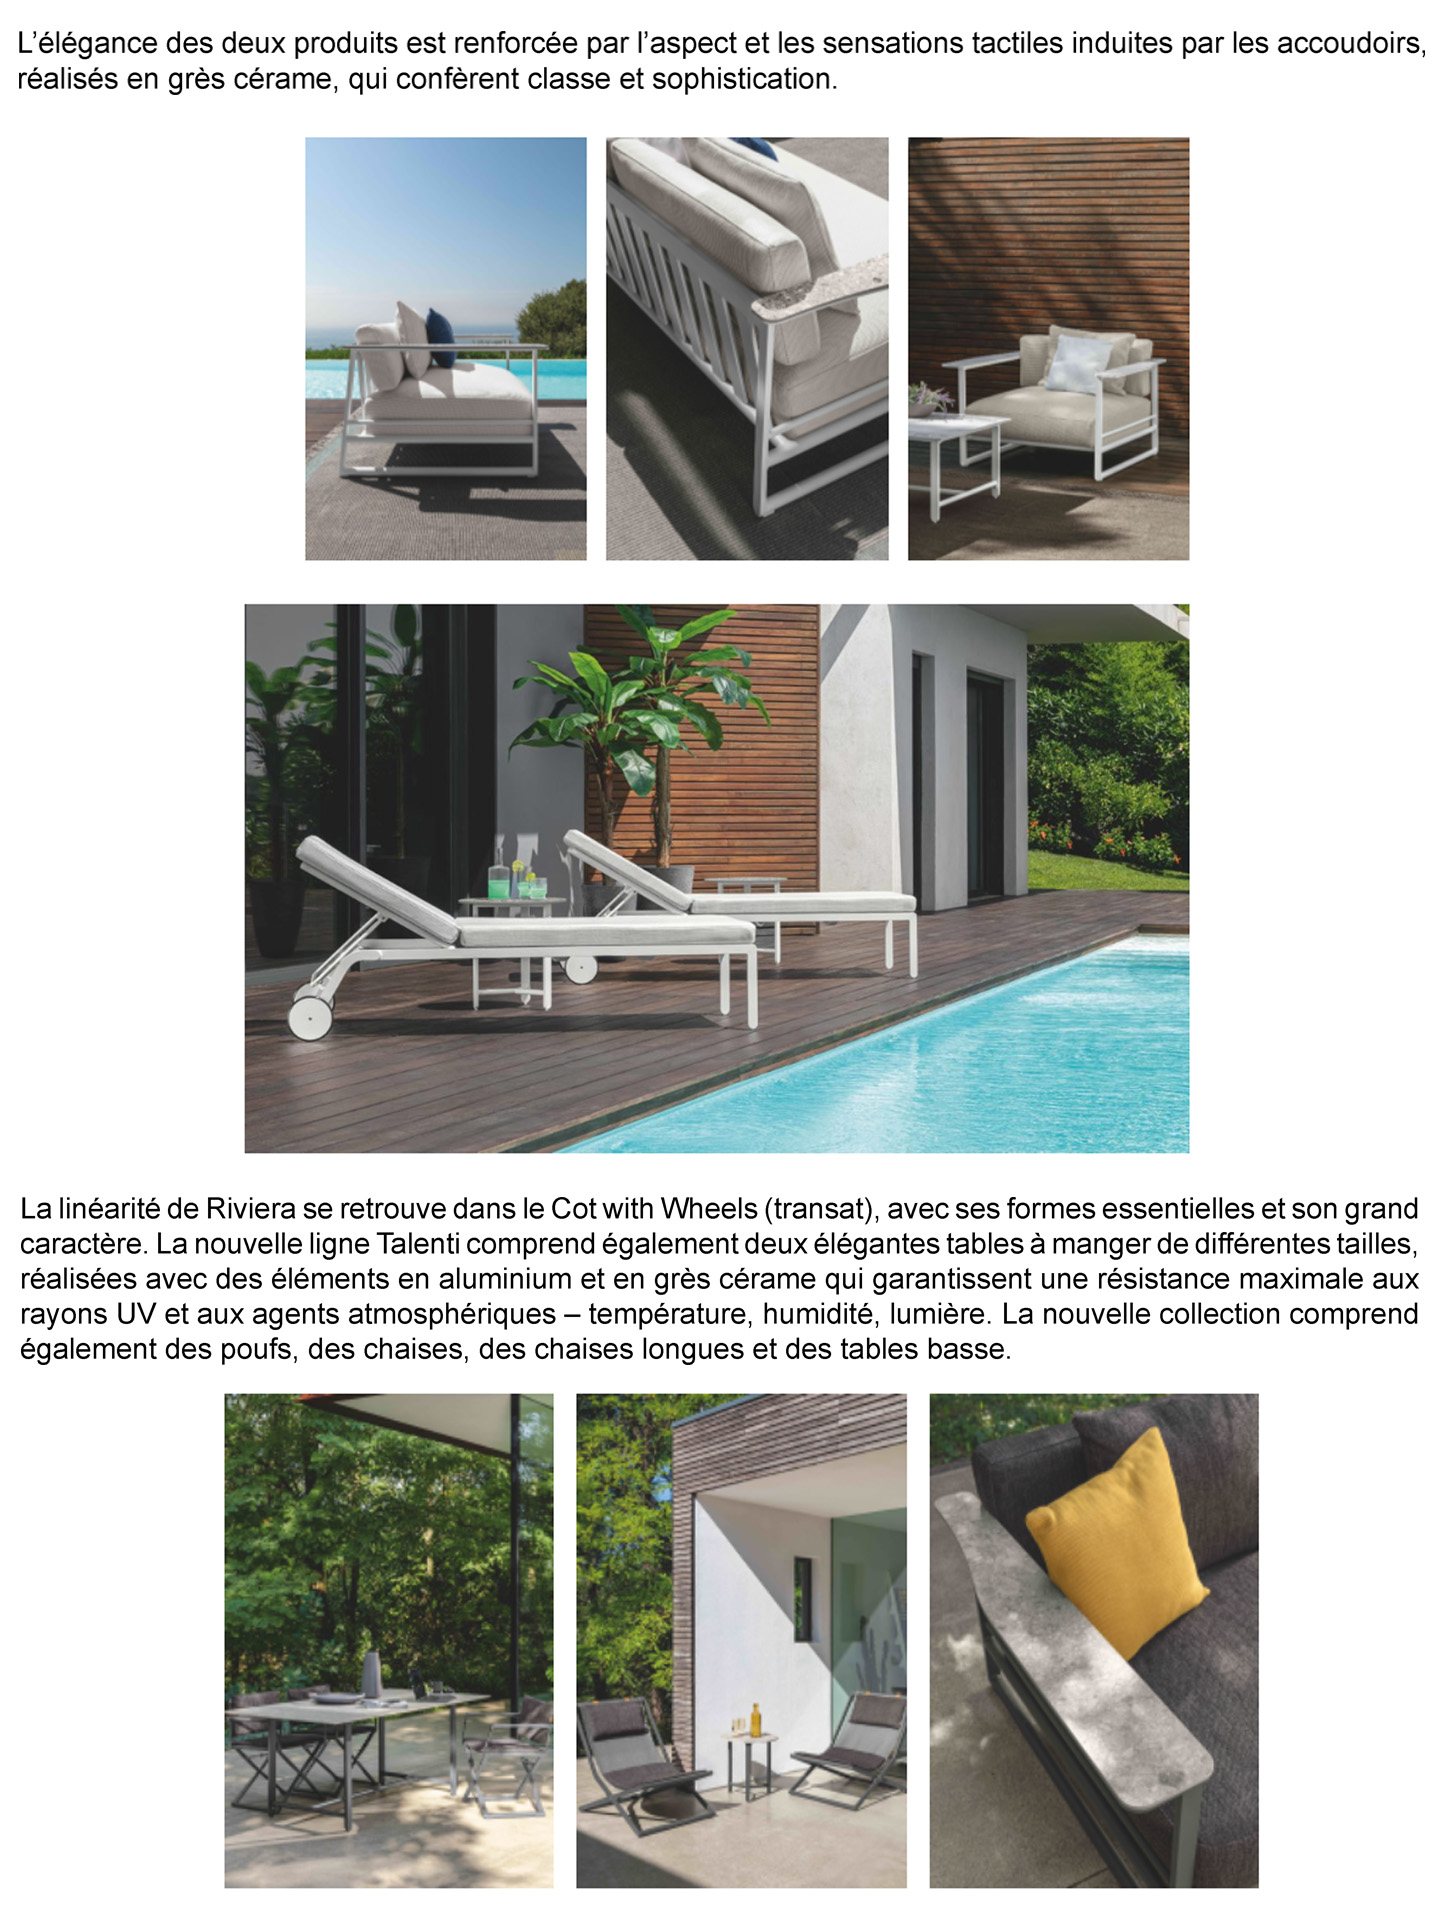 article on the Riviera range of outdoor chairs and beds in architectures cree magazine, designed in collaboration between talenti outdoor living and the interior design studio jean-philippe nuel